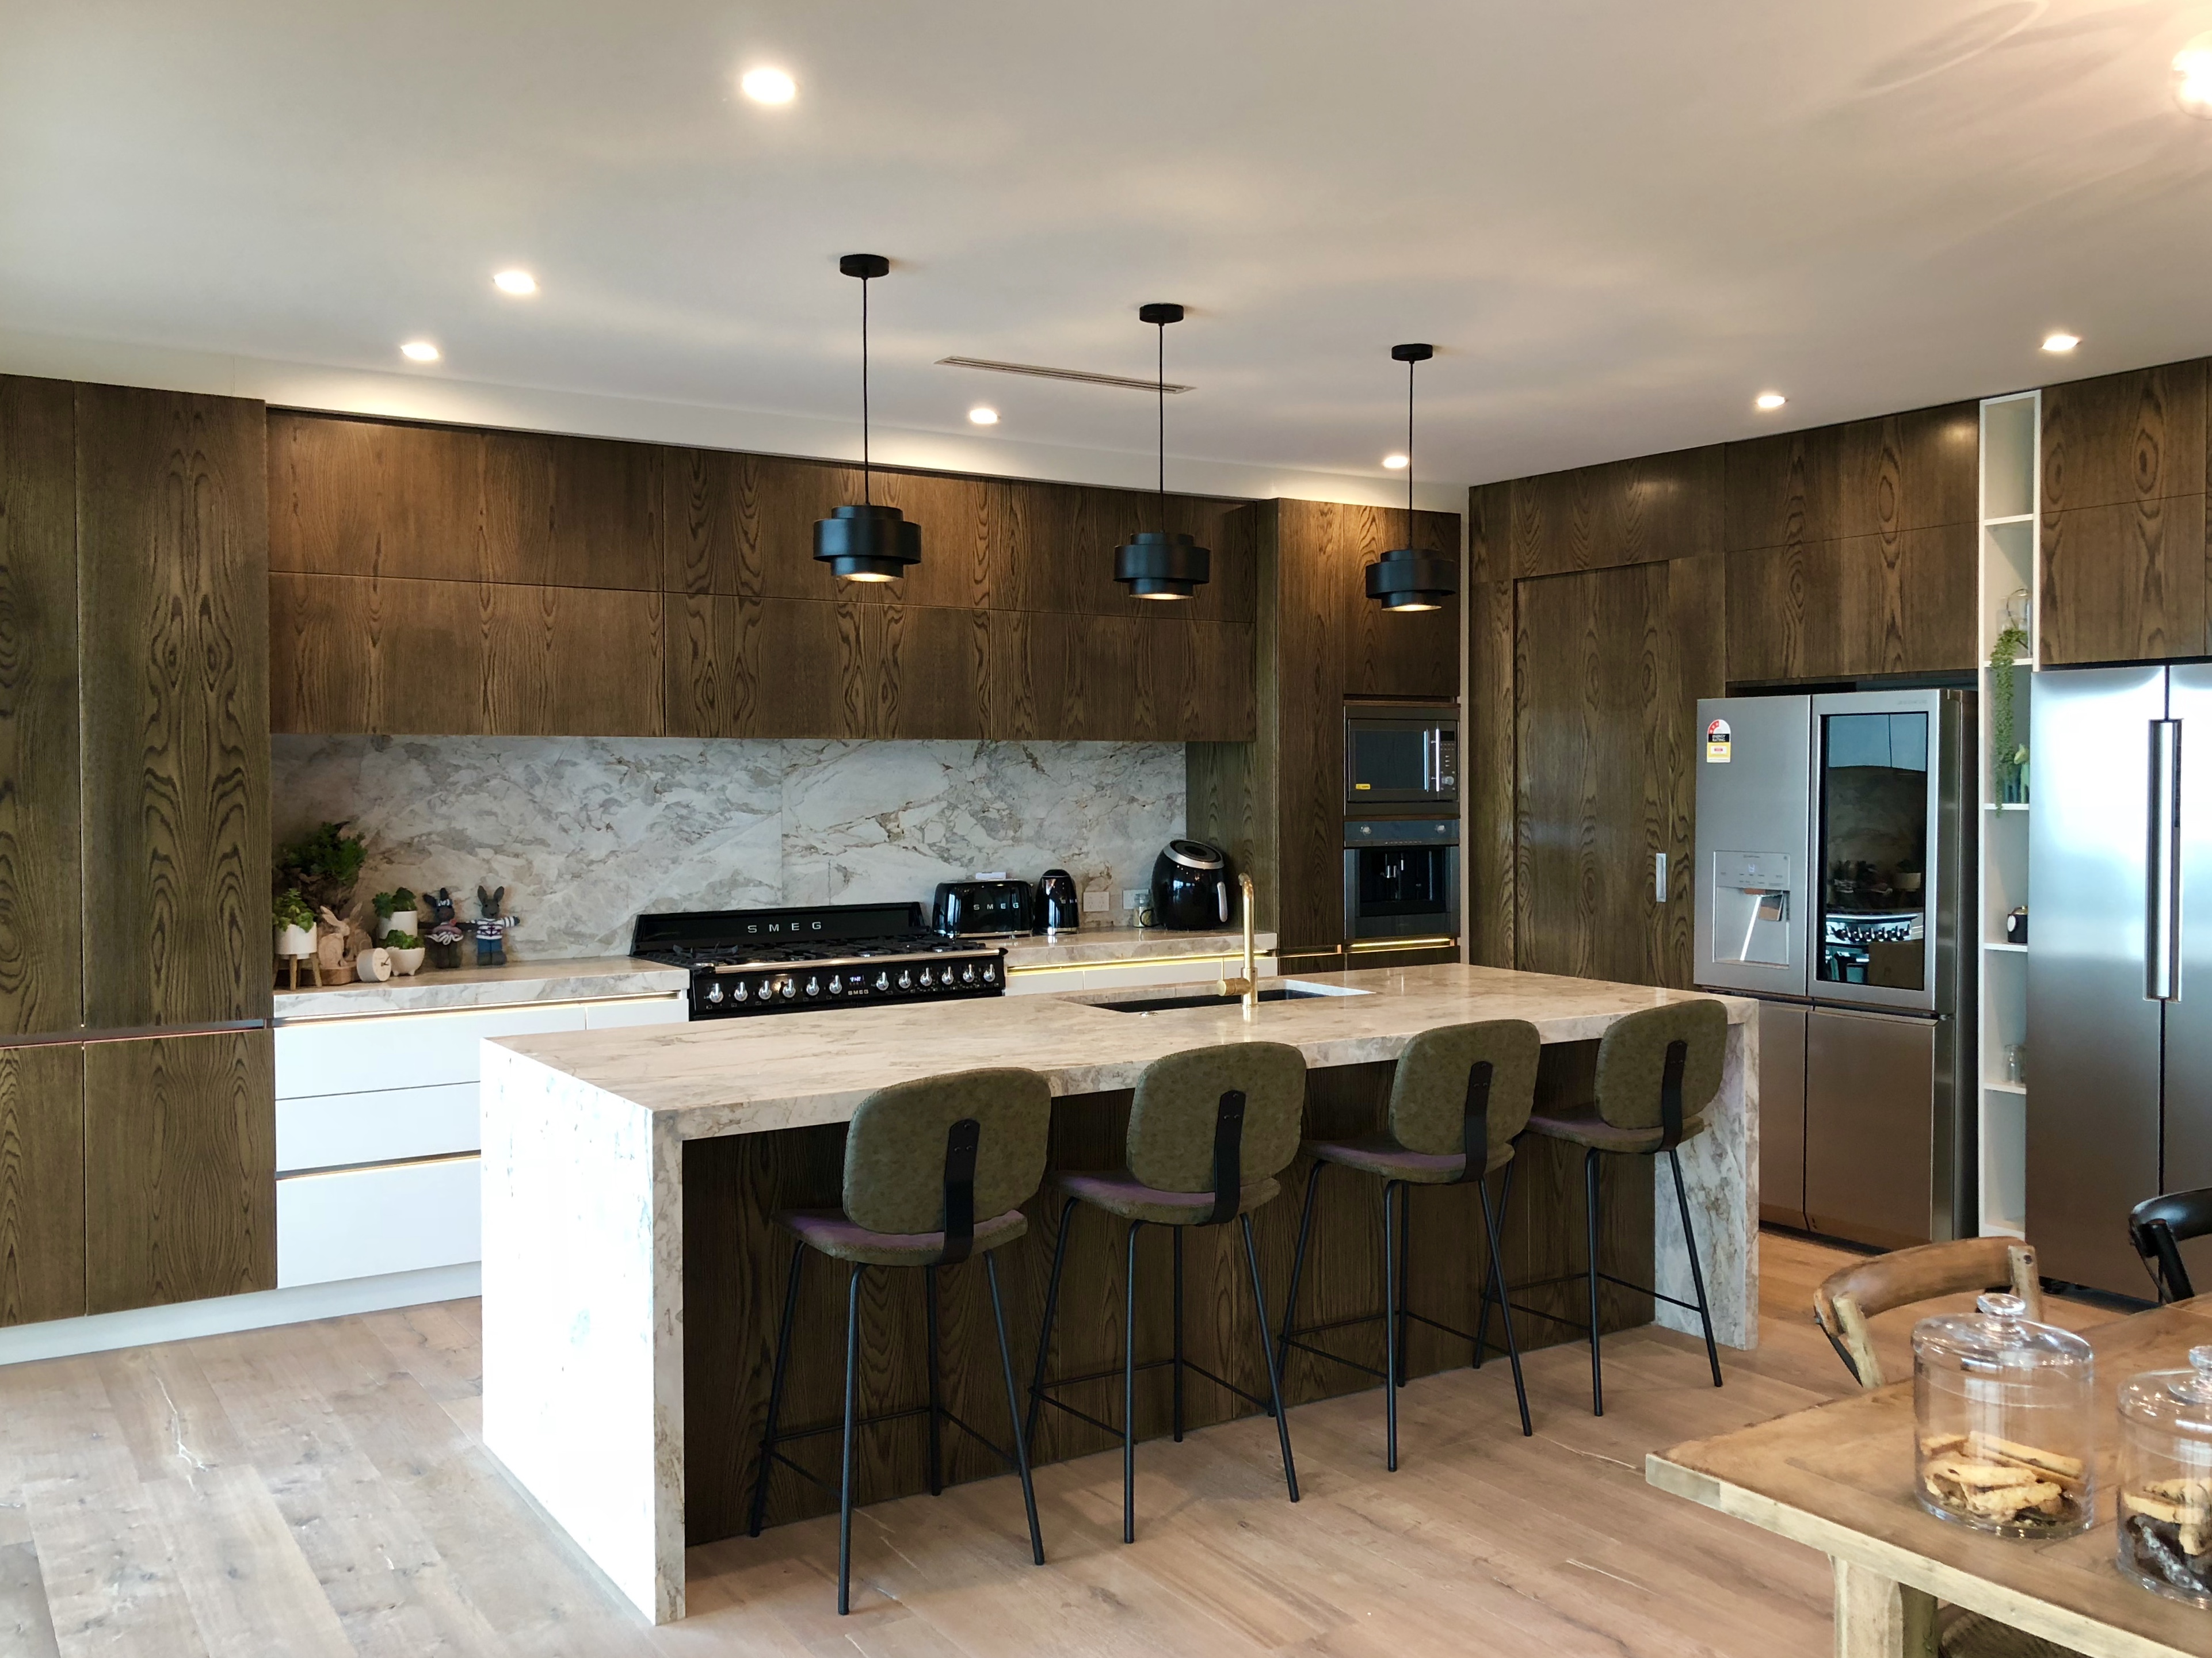 our projects - gj kitchens - auckland kitchens, new zealand